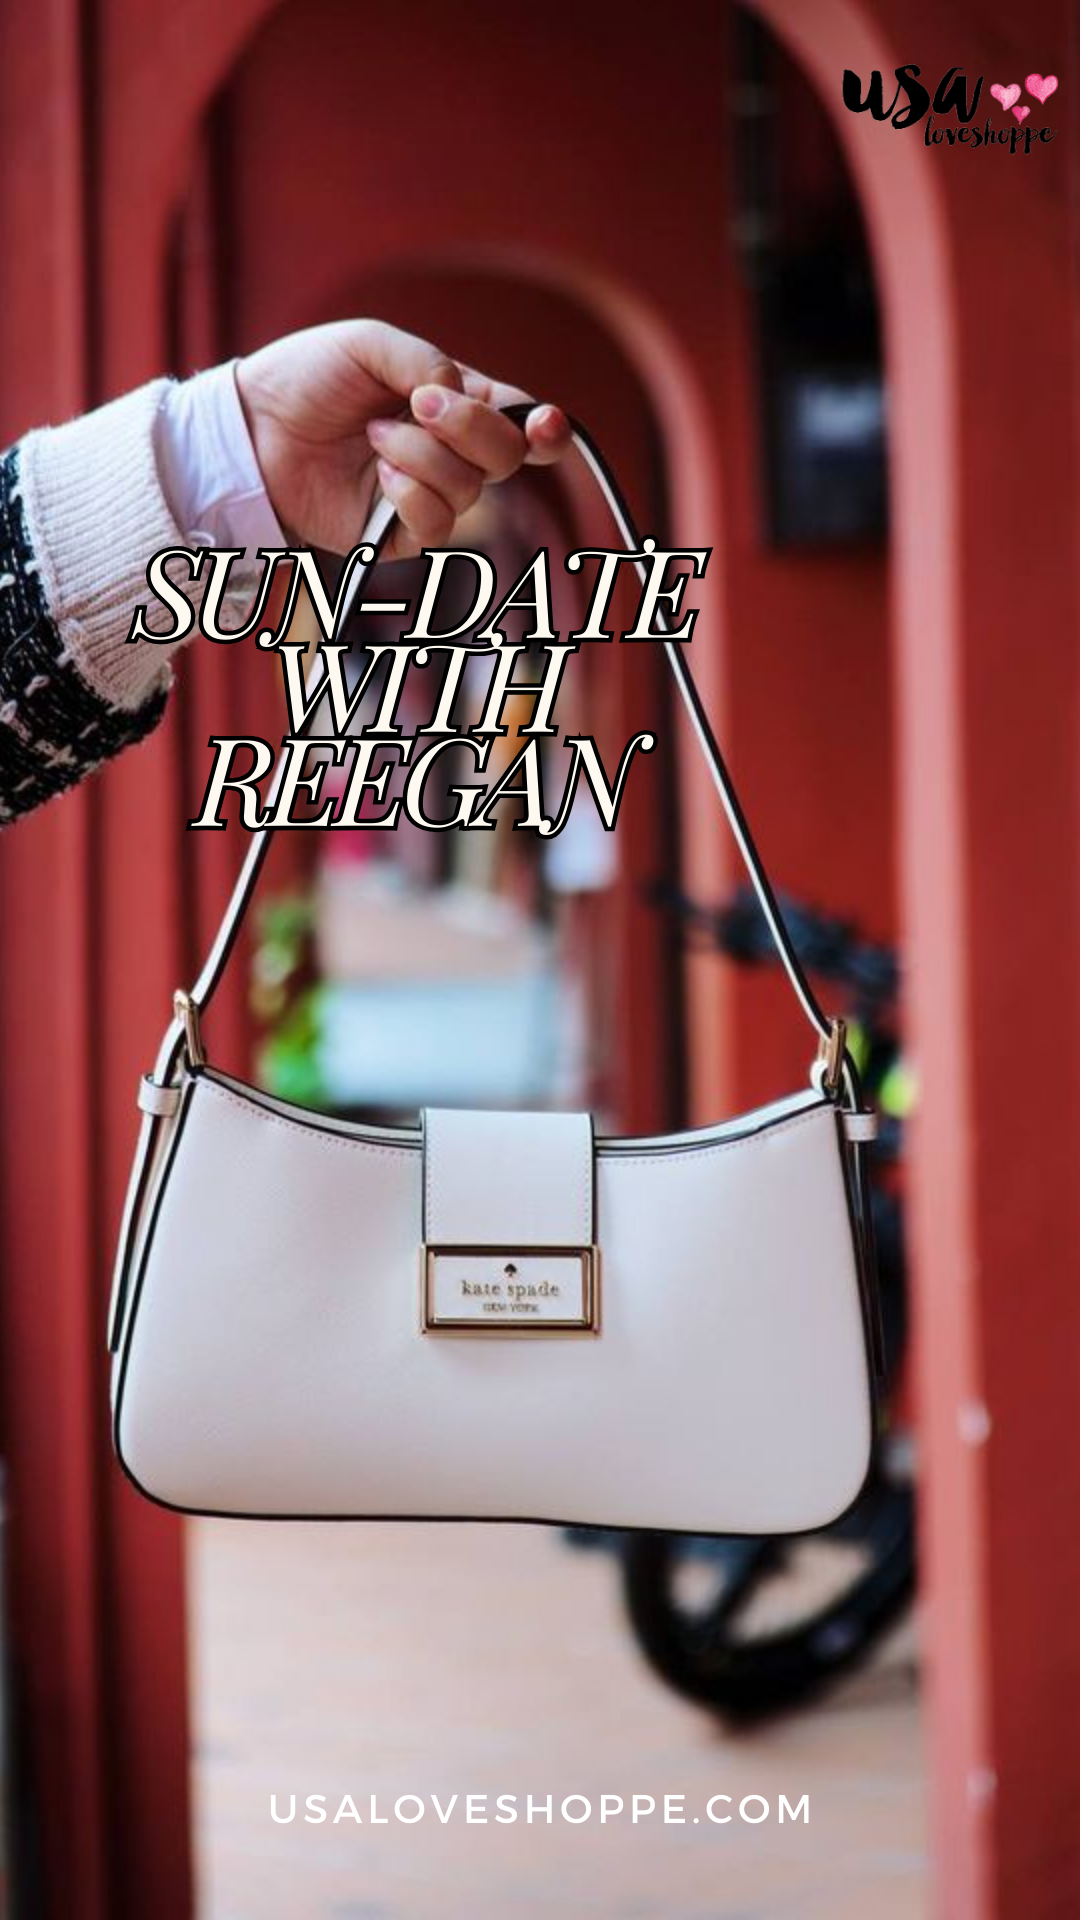 Embrace the Romance of Every Day with the Kate Spade Reegan Small Shoulder Bag